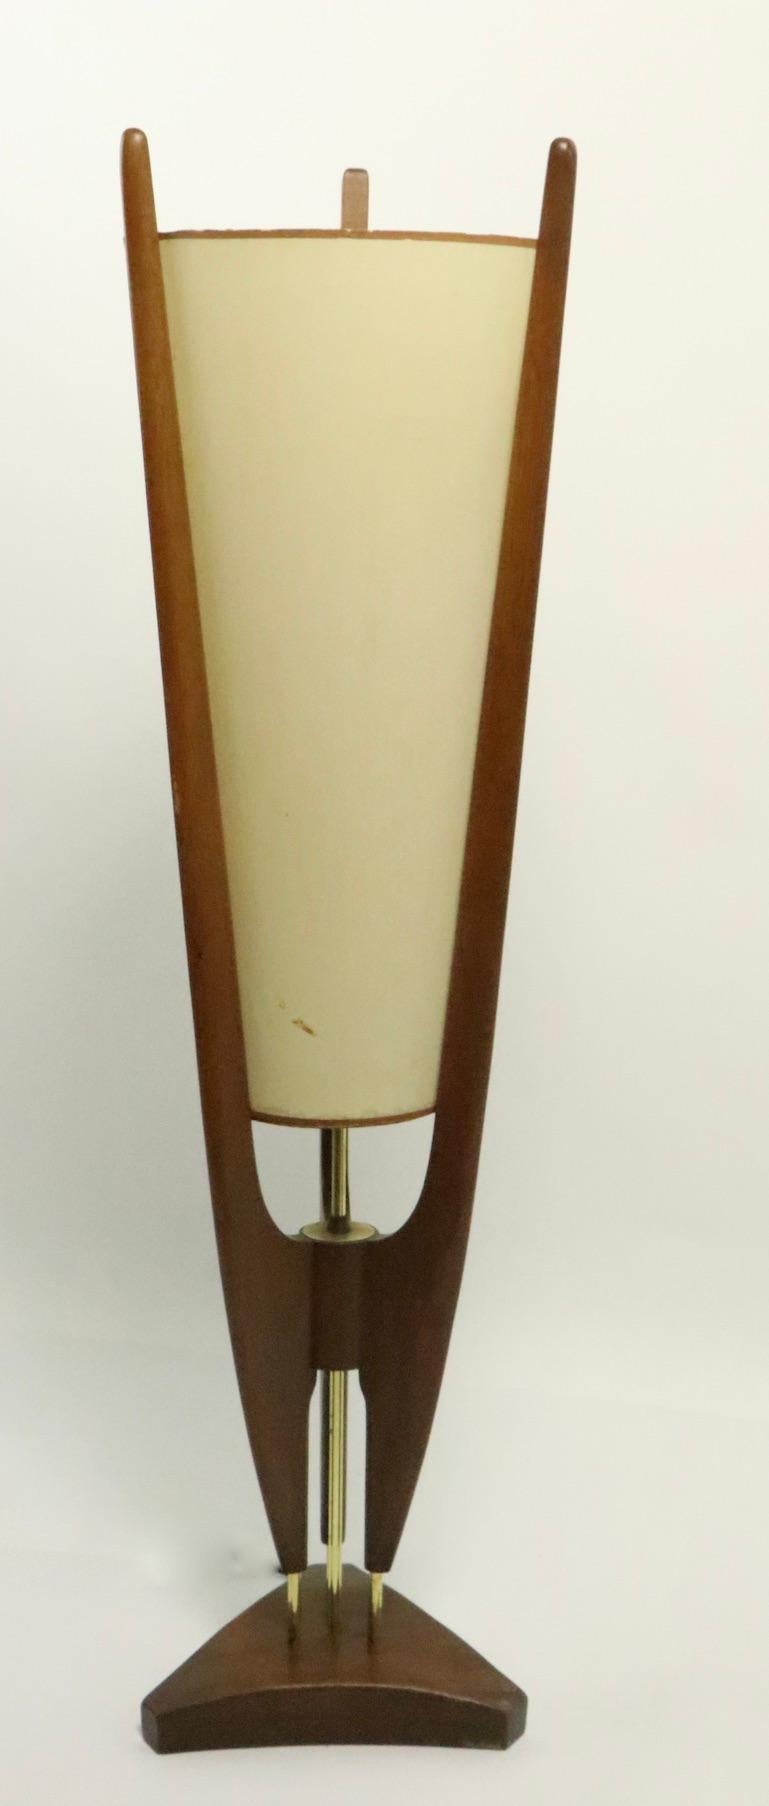 Dramatic midcentury table lamp designed by John Keal for Modeline. This stunning lamp features a tapering conical shade (original) which is supported by sculptural walnut struts on a triangular base. This example is in original, untouched condition,